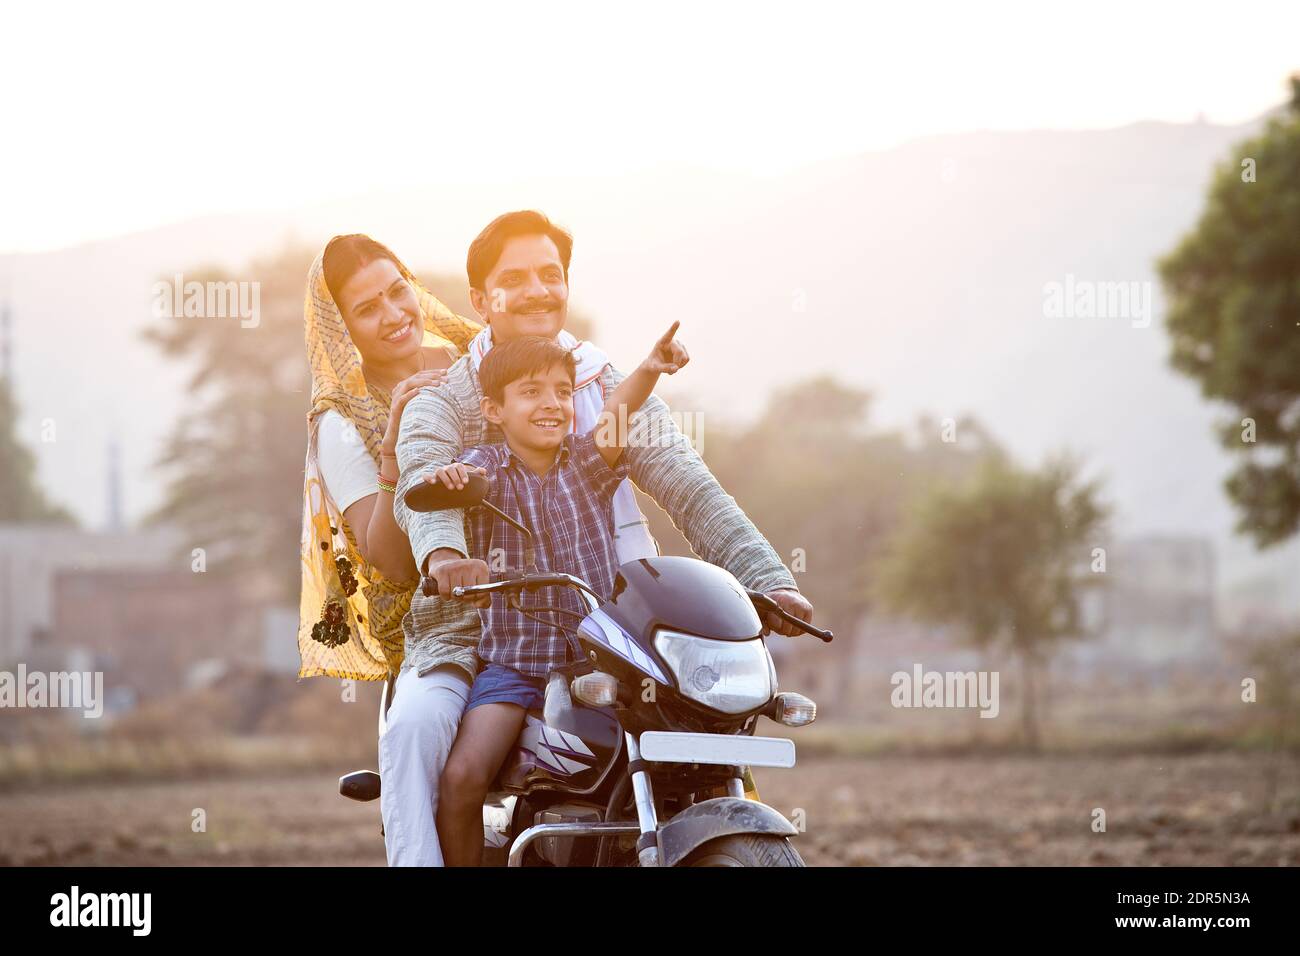 Happy rural Indian family riding on motorcycle Stock Photo